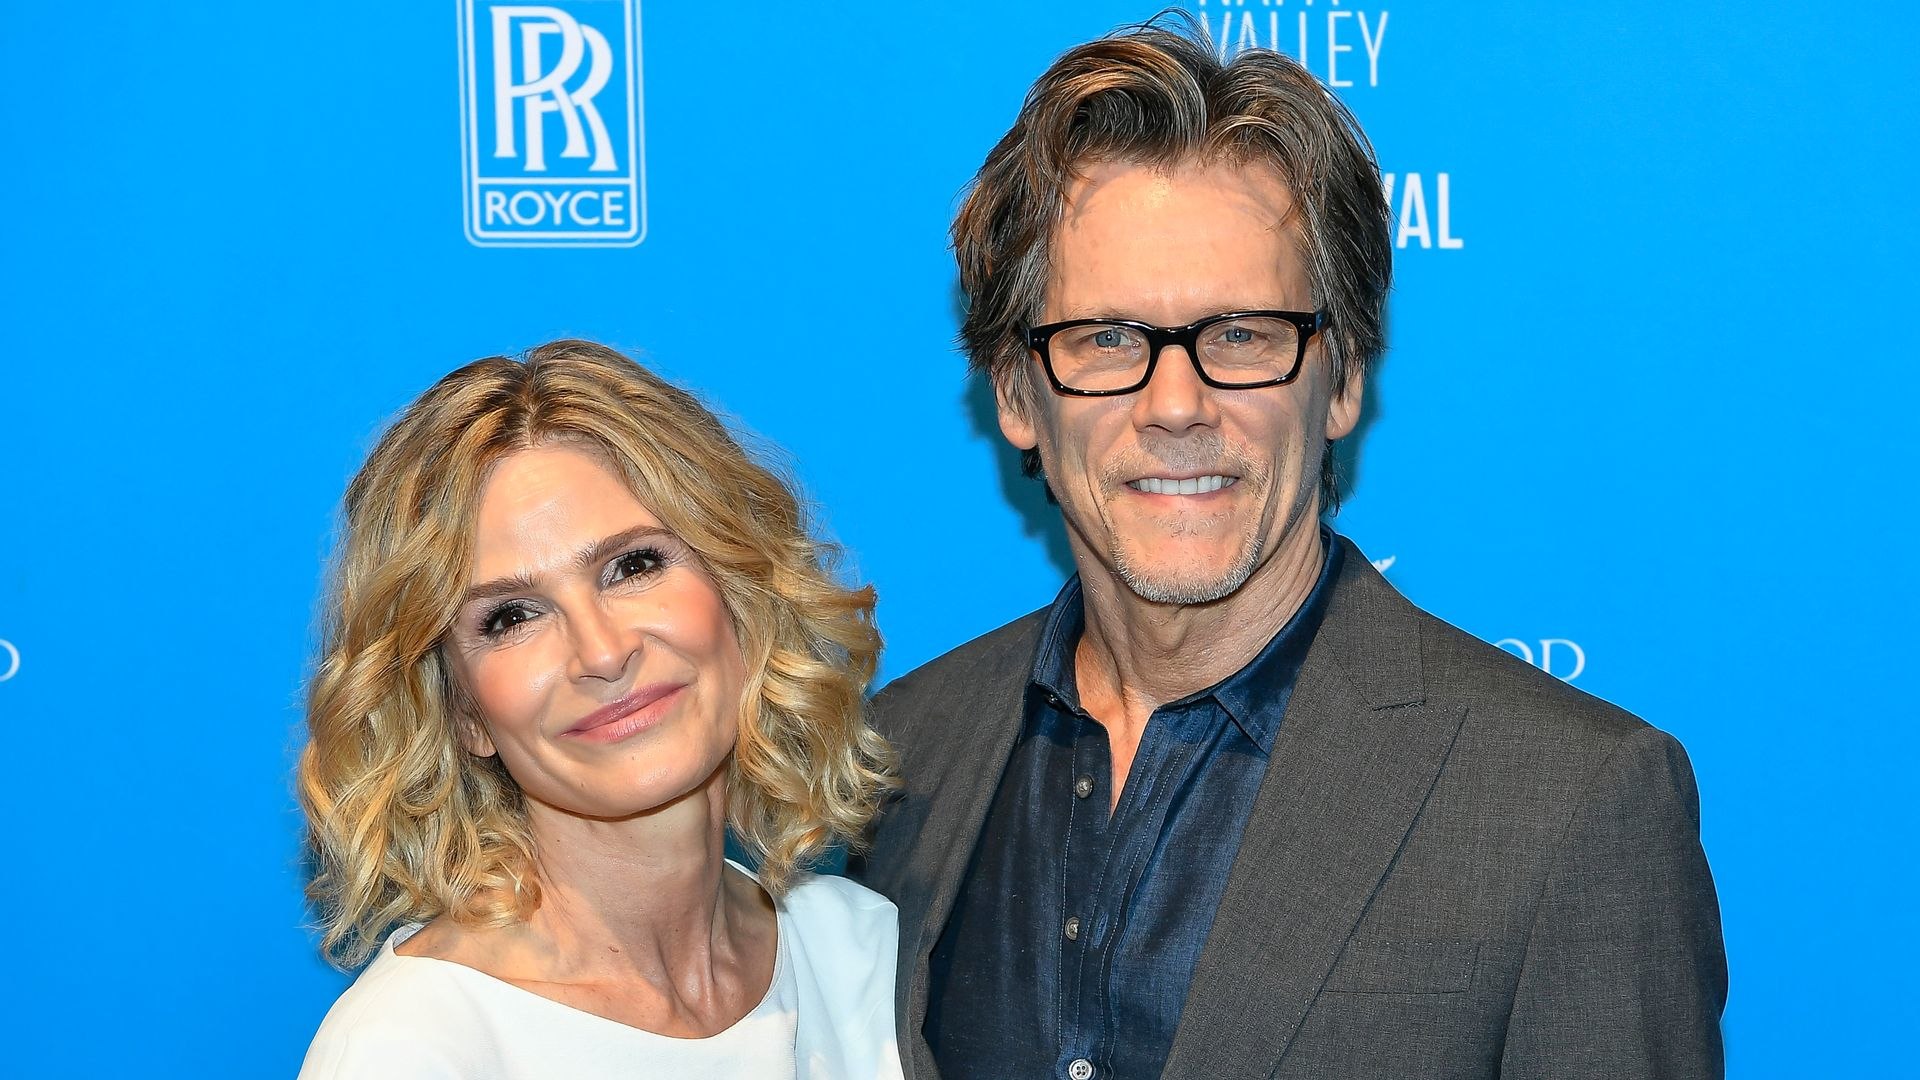 Kyra Sedgwick and Kevin Bacon attend the Napa Valley Film Festival Celebrity Tributes at the Lincoln Theatre